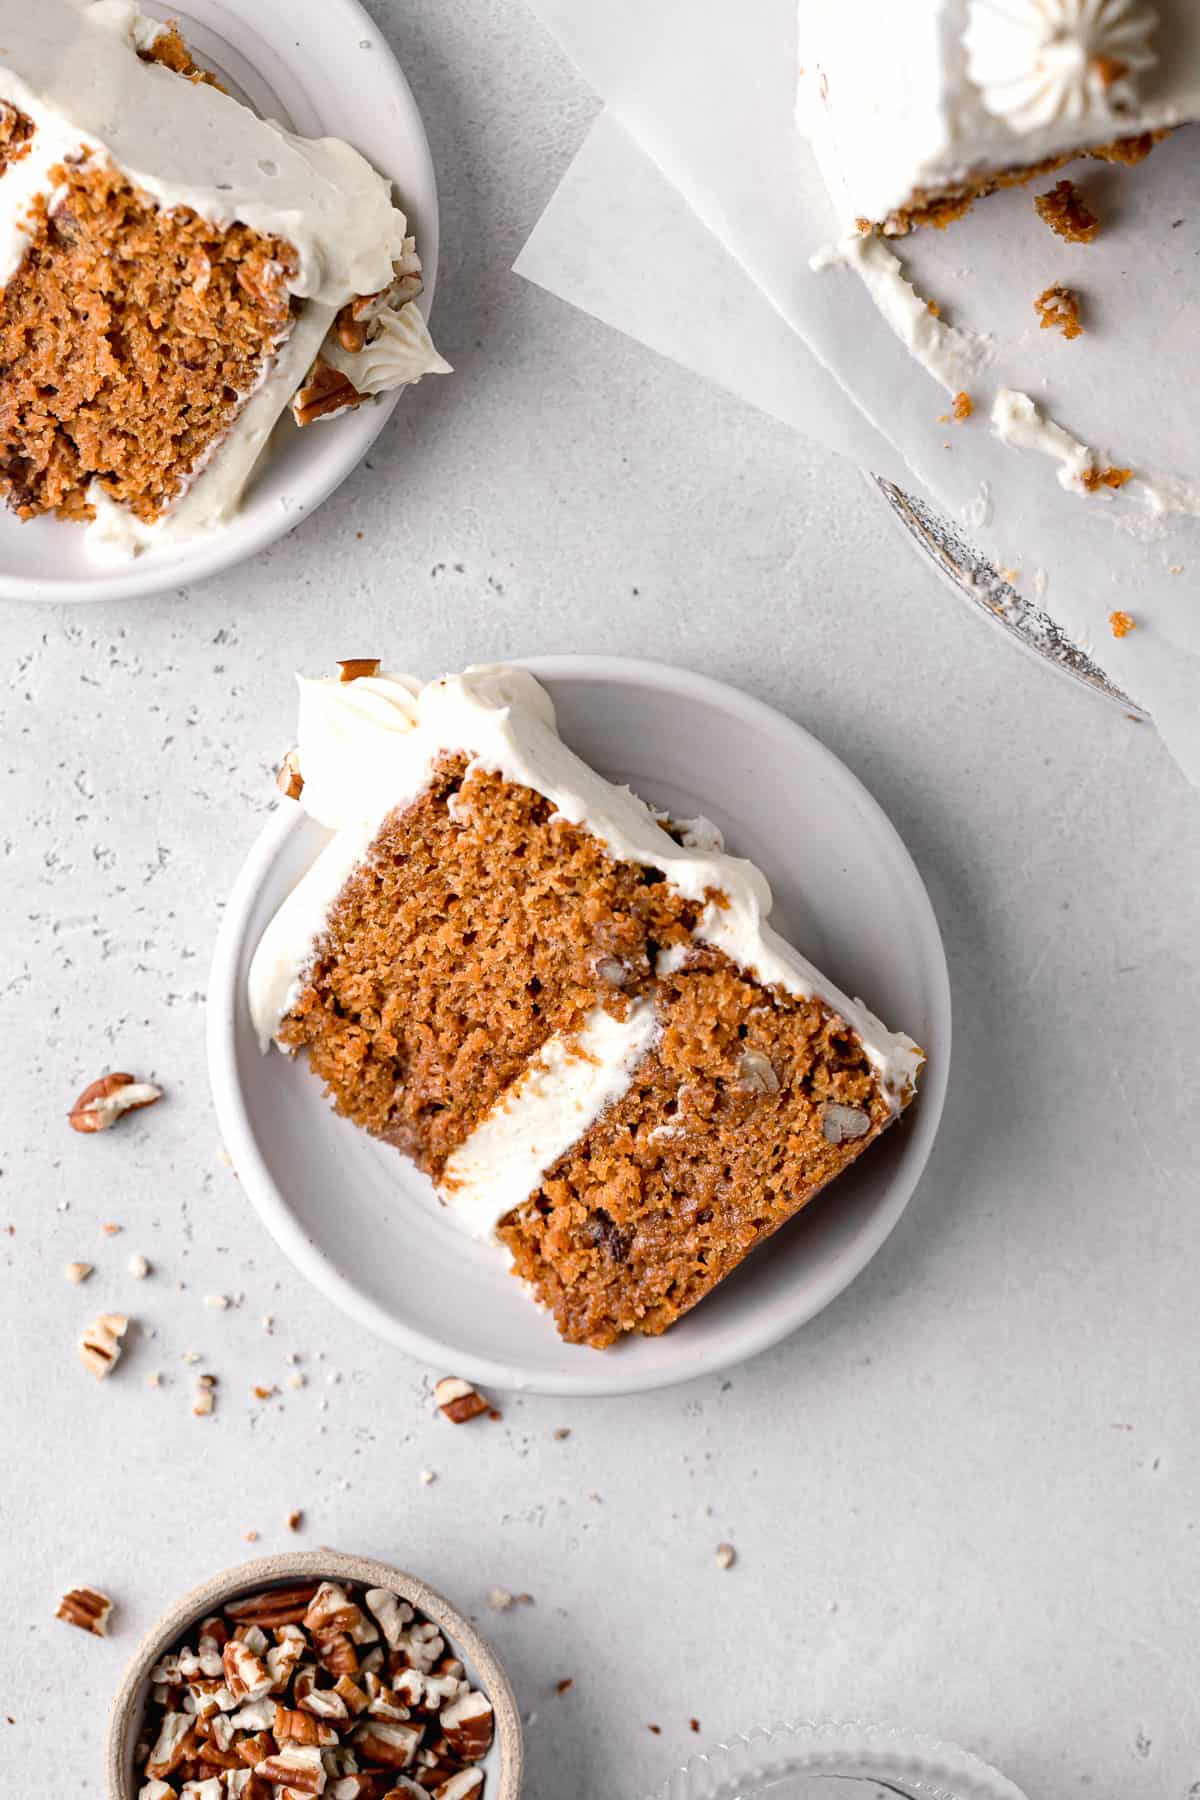 slice of small carrot cake on white plate.